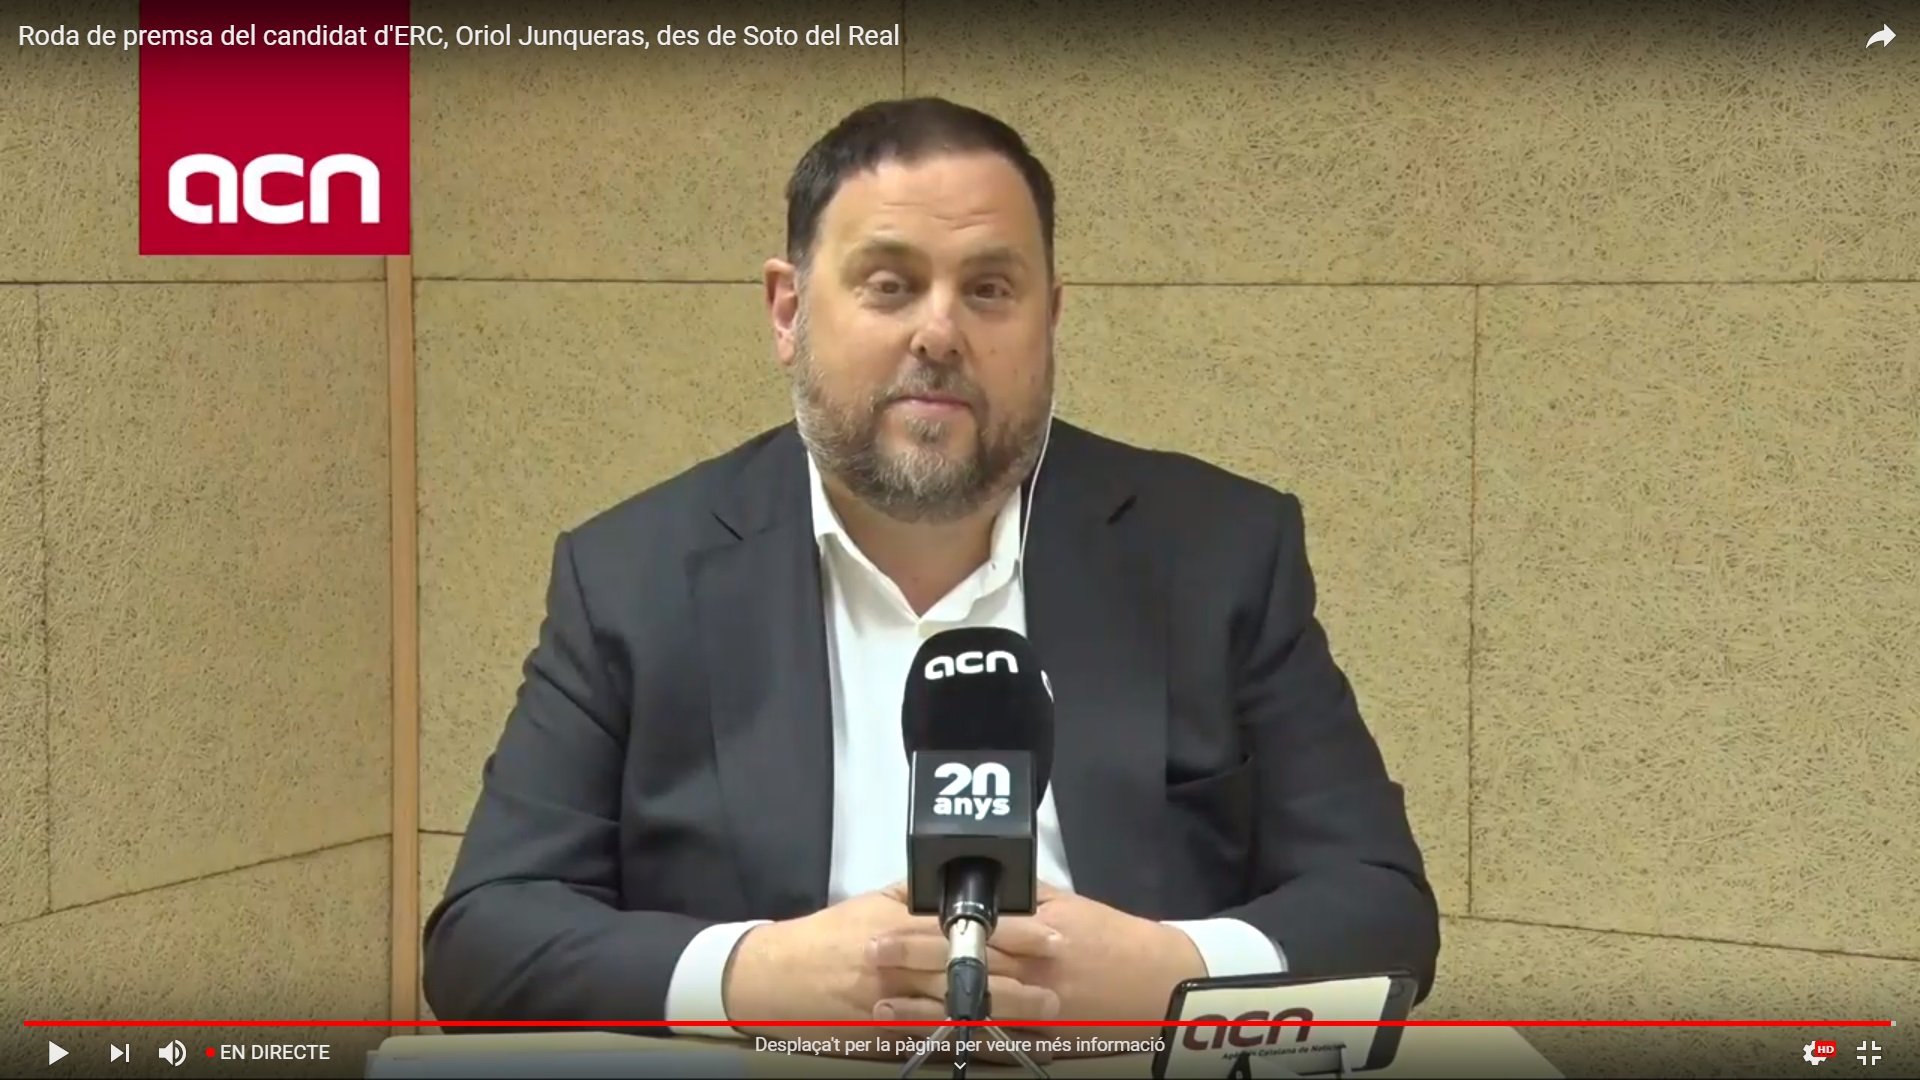 Spain's Supreme Court, in favour of preventing Junqueras from being an MEP